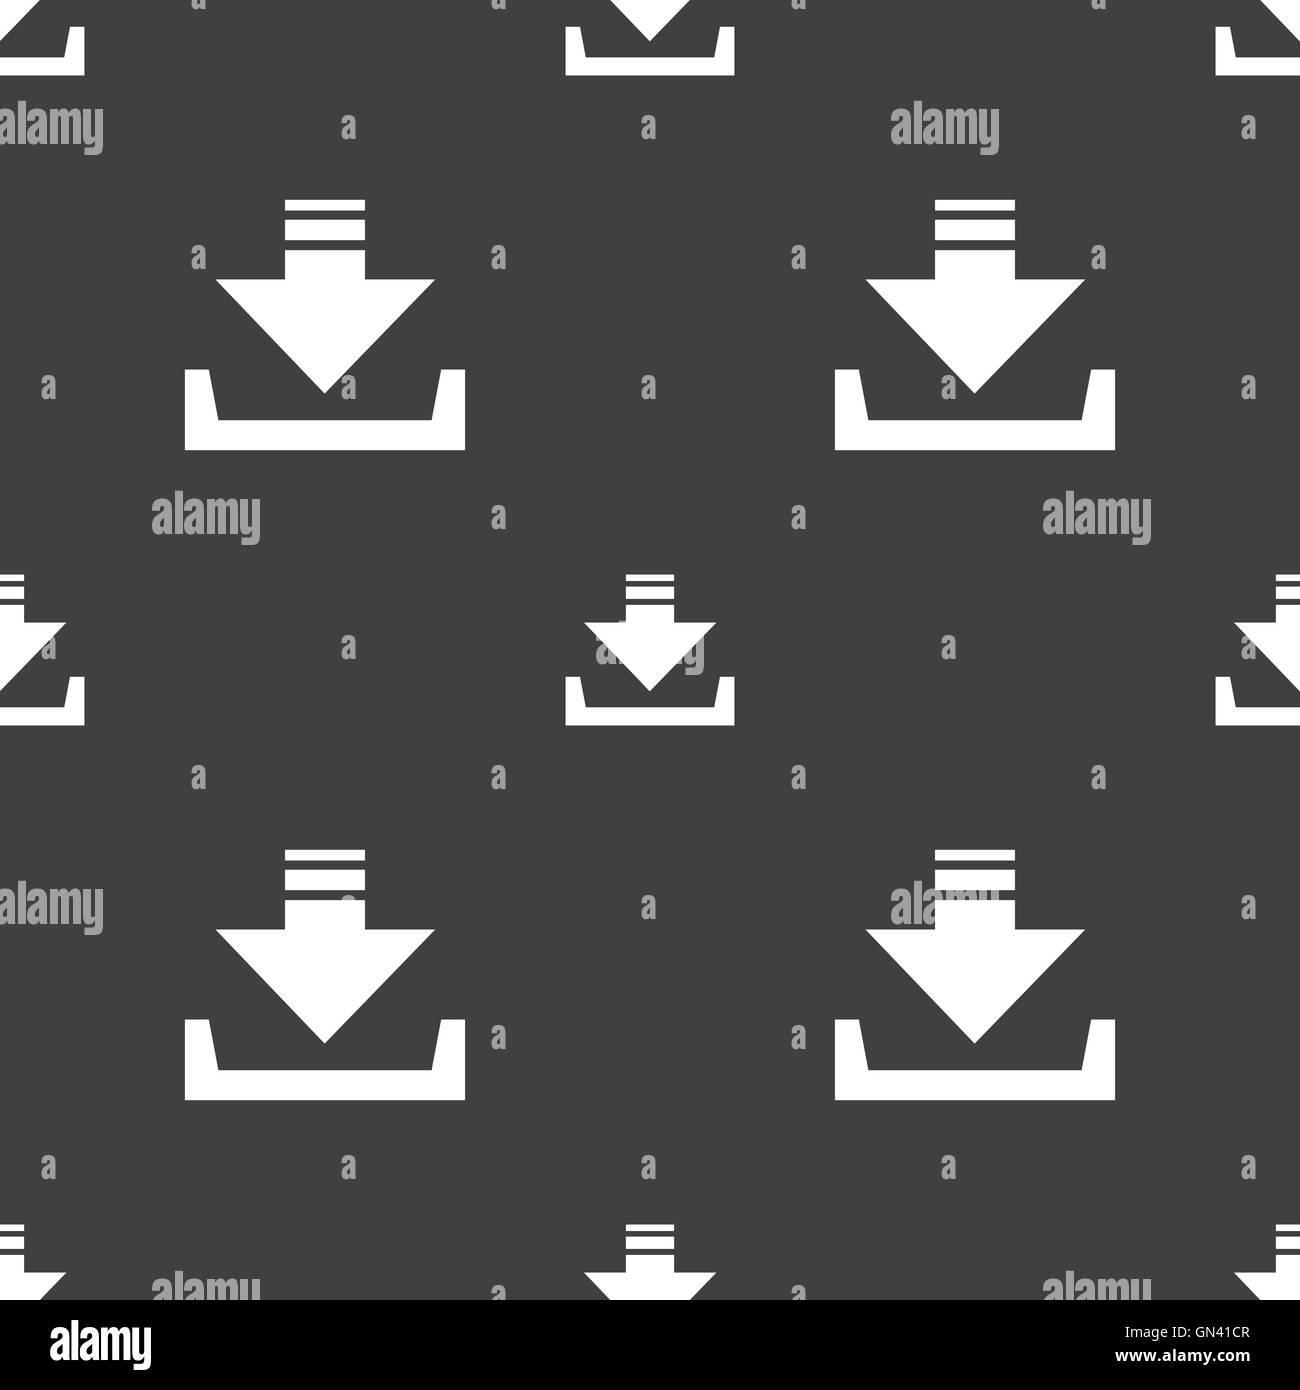 https://c8.alamy.com/comp/GN41CR/restore-icon-sign-seamless-pattern-on-a-gray-background-vector-GN41CR.jpg